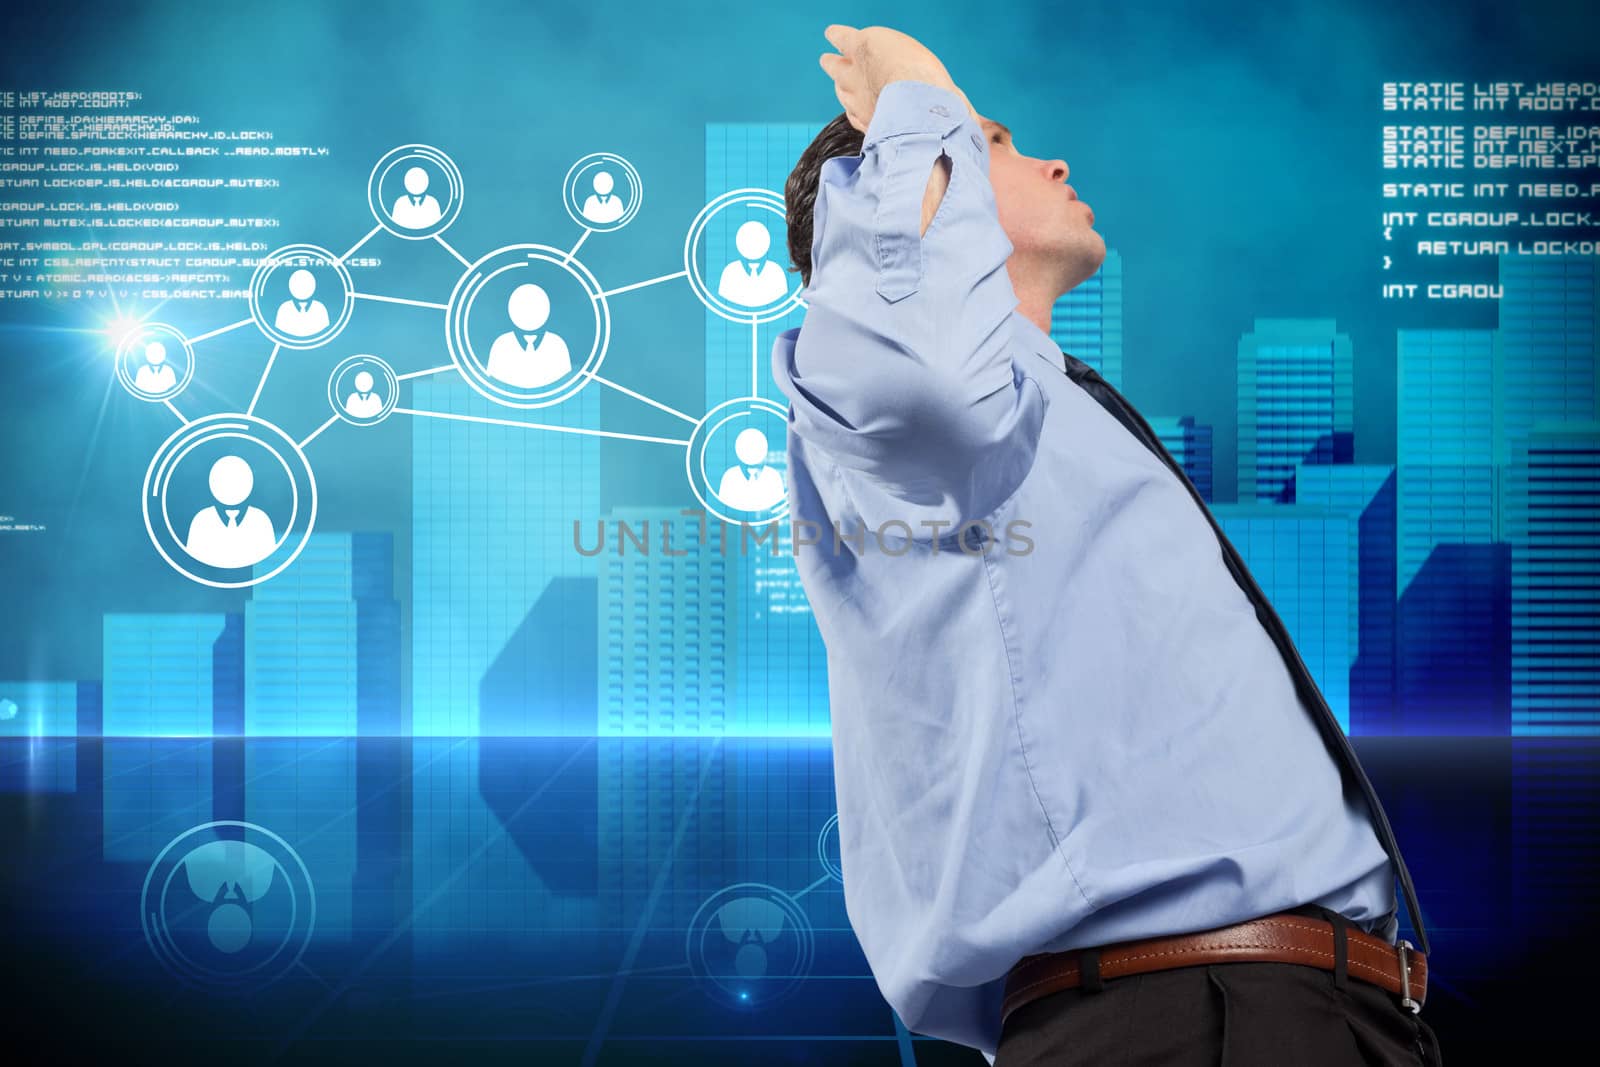 Businessman posing with arms raised against futuristic technology interface